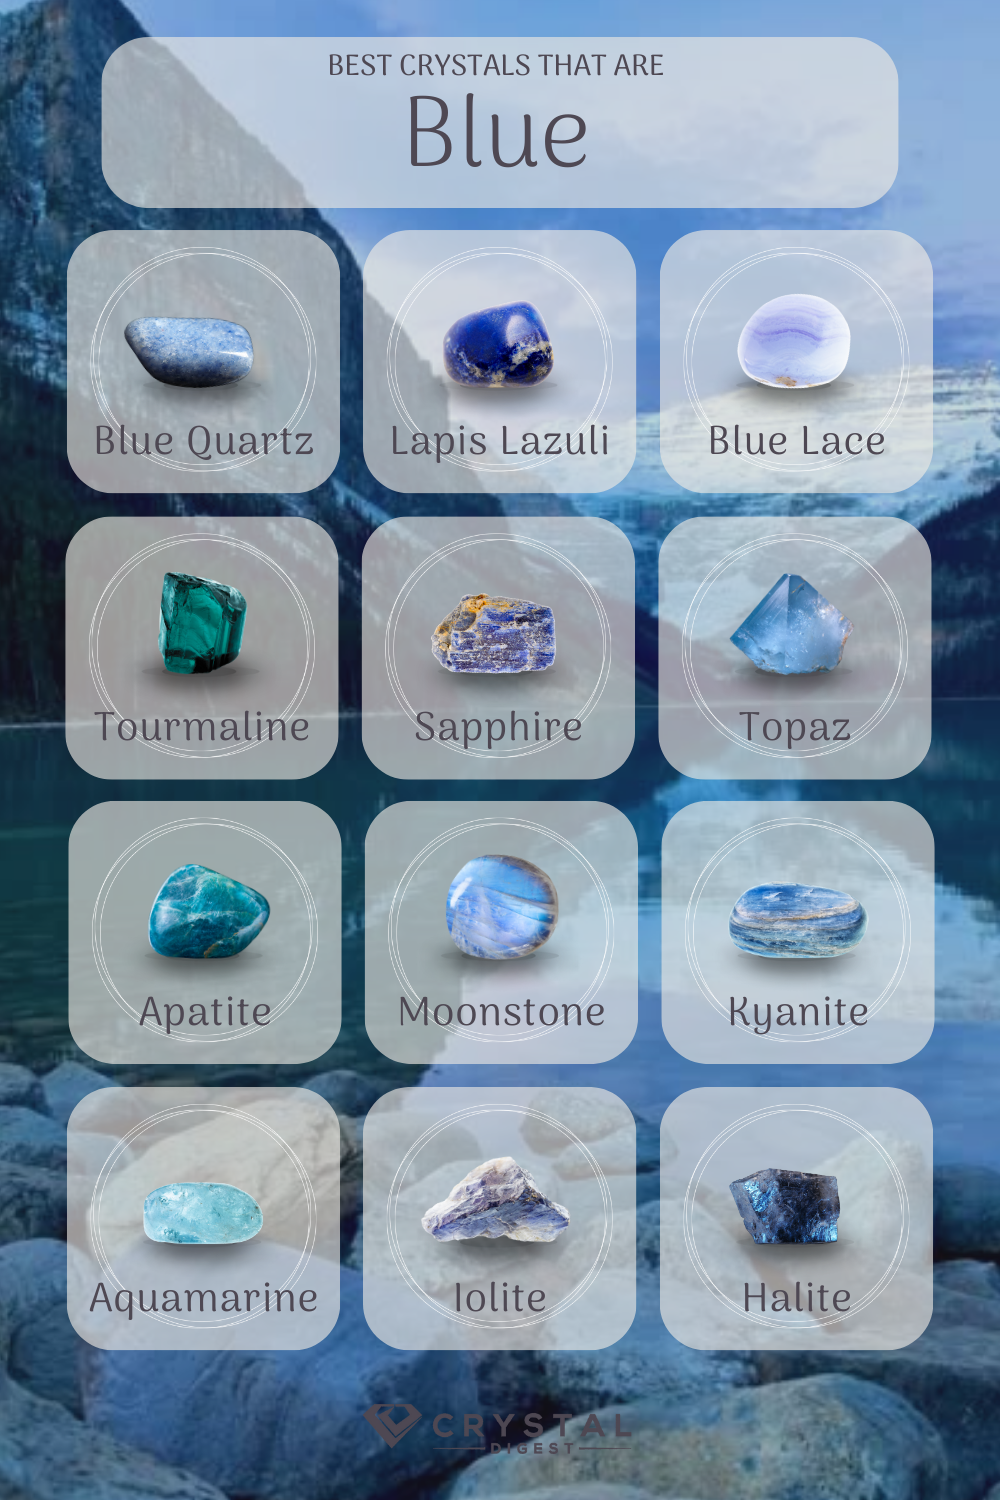 Best Crystals that are blue